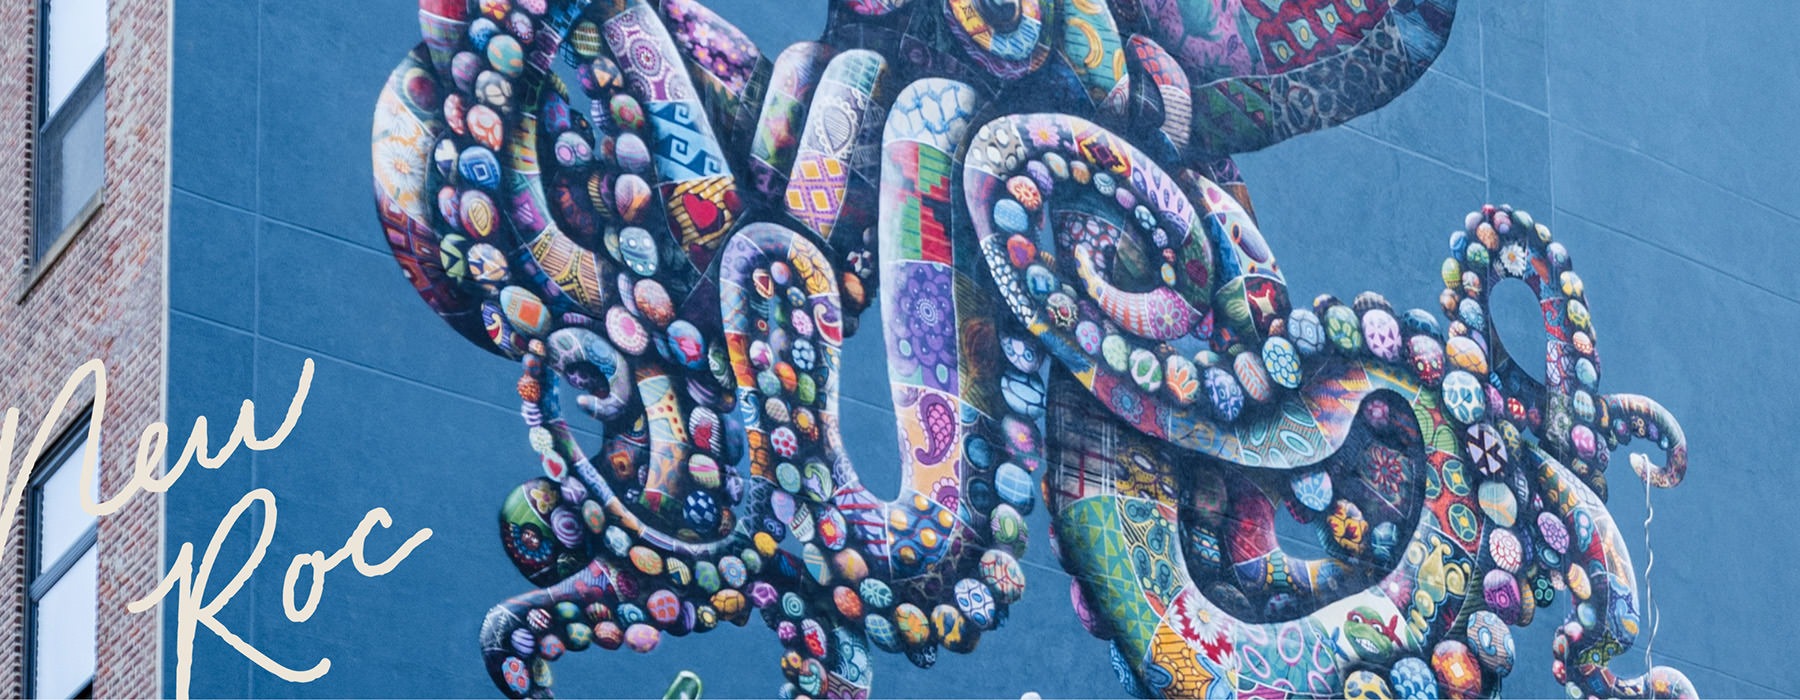 Large mural of an octopus 